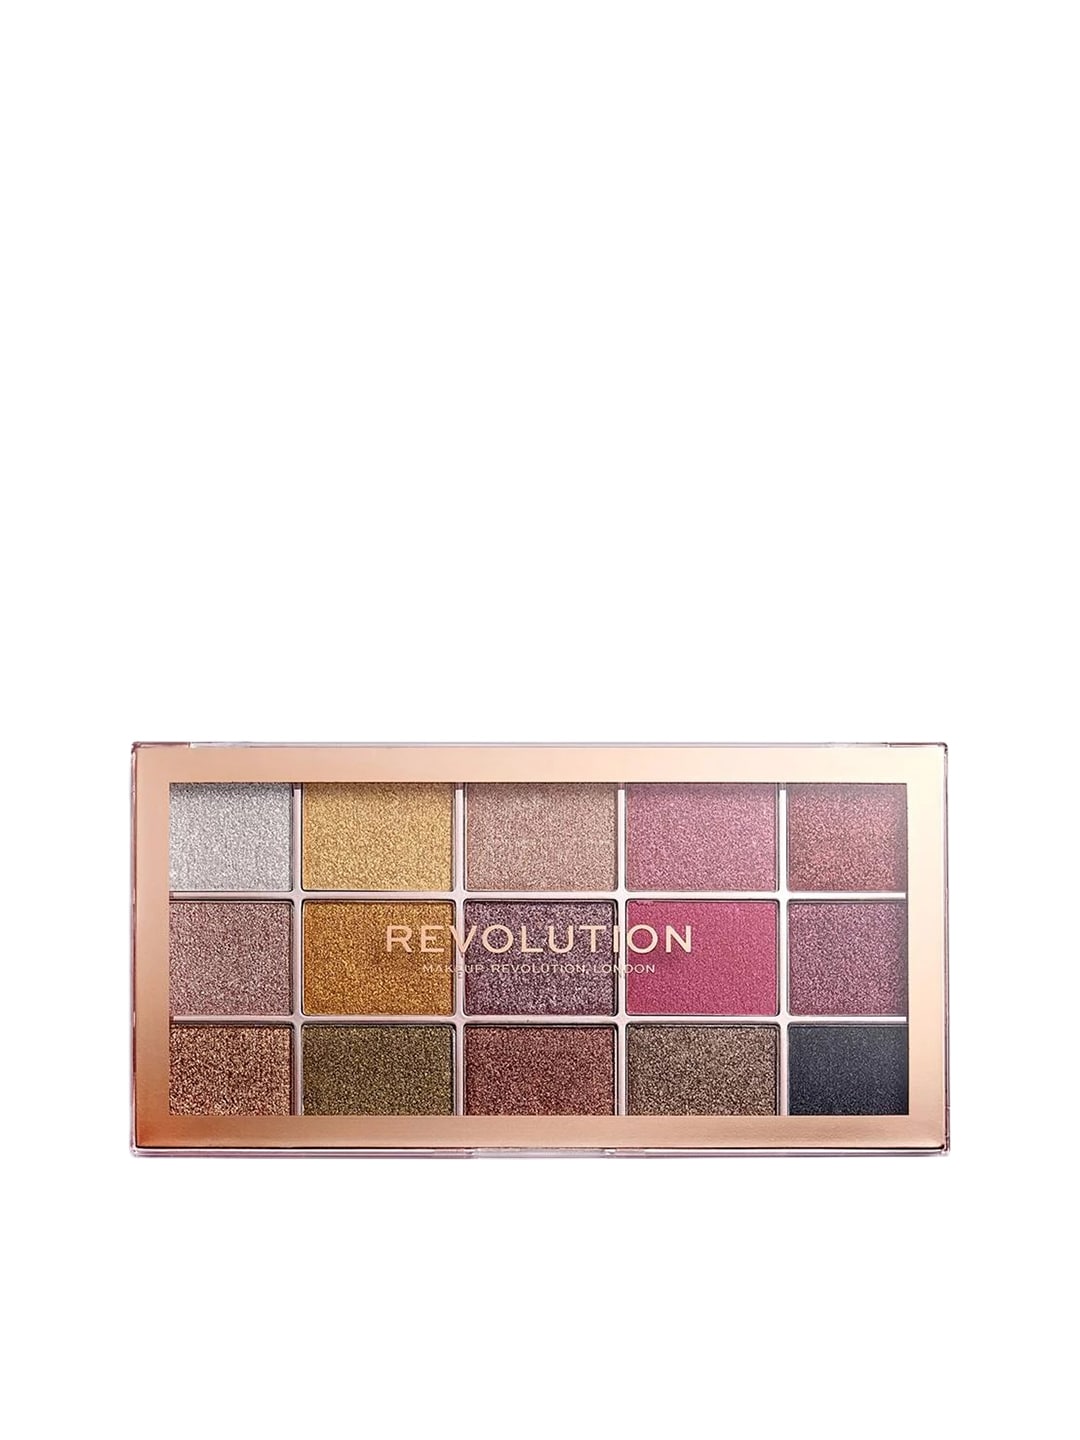 Makeup Revolution London Eyeshadow Palette - Foil Frenzy Creation Price in India